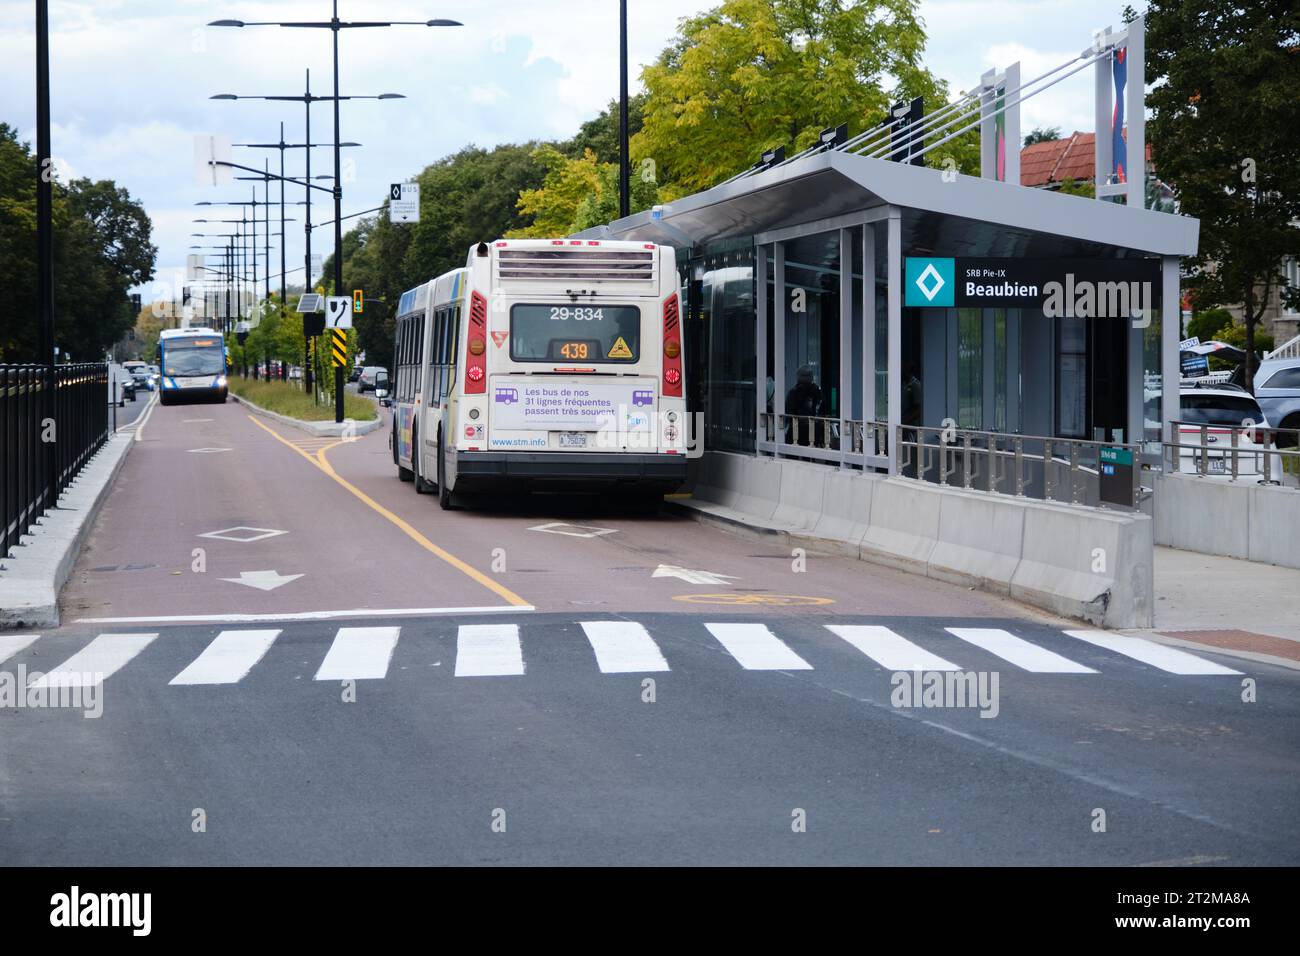 Pie-IX BRT is a bus rapid transit stop at Beaubien, with Bus in dedicated lane, part of Montreal Transit system Stock Photo